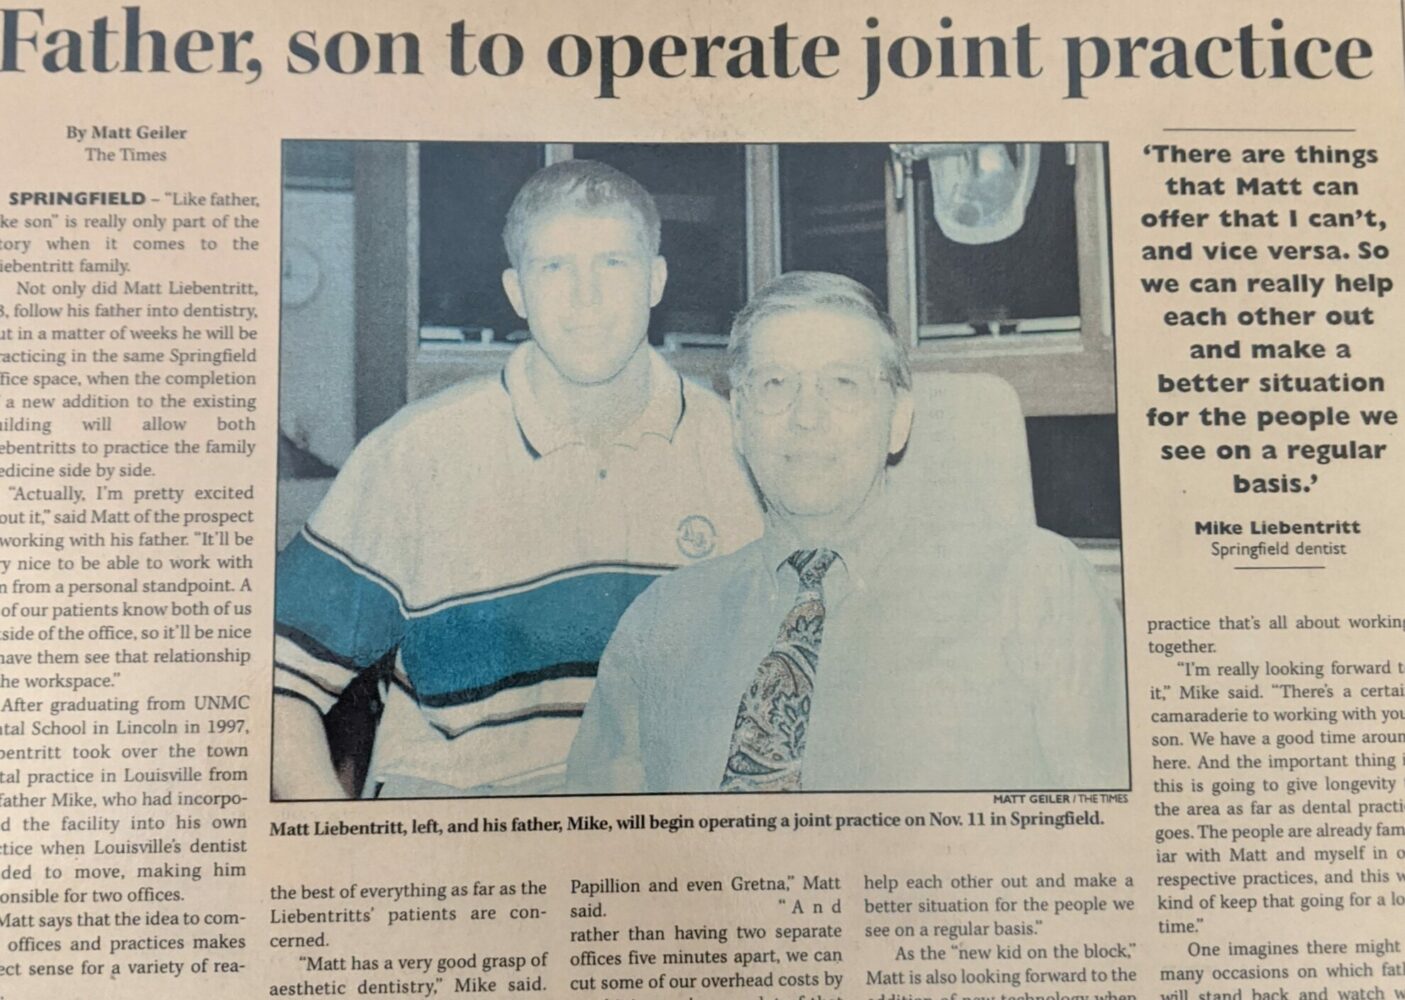 Dr. Mike Liebentritt started his dental practice in Springfield in 1974 across the street from our current office which he purchased in 1982. Dr. Matt joined his father’s practice in 1997. The two enjoyed practicing dentistry together for 14 years.